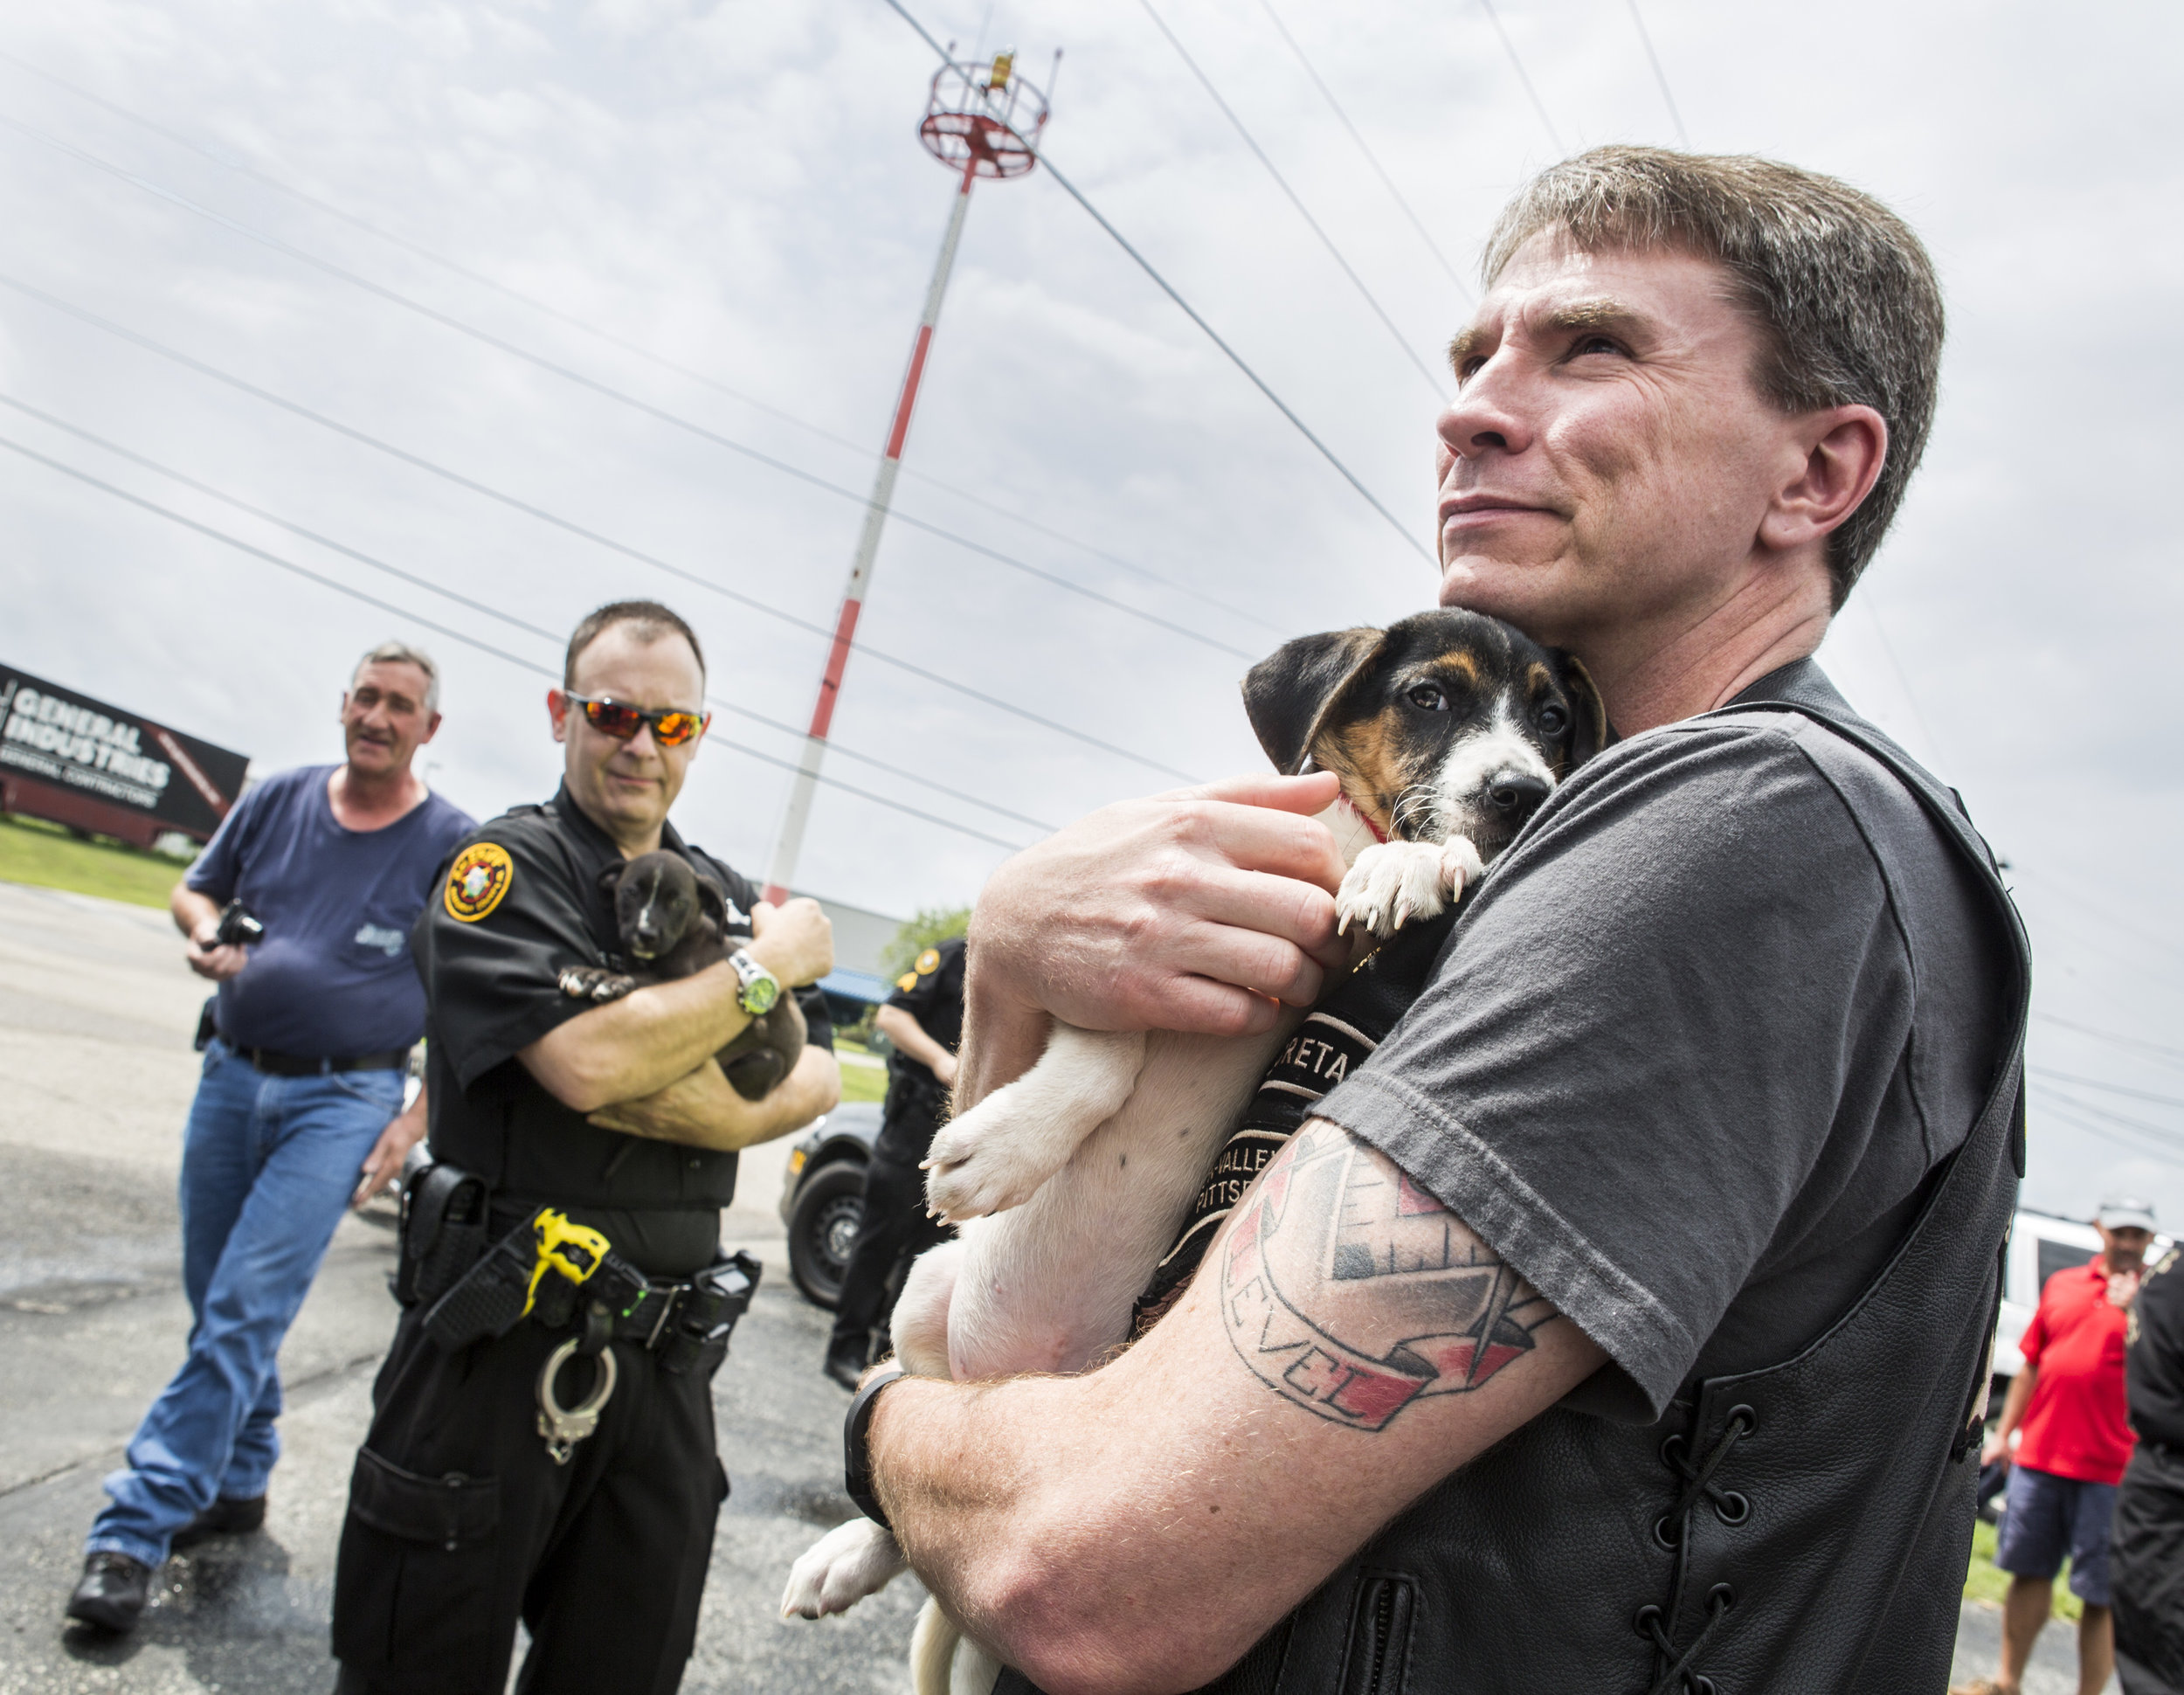  John Schivik of the Mon Valley Harley Owners Group greets a puppy after a long ride from Tennessee at the Rostraver Airport on Saturday, July 30, 2016. The dogs were being taken back to Hot Metal Harley-Davidson for a fundraiser and were being put u